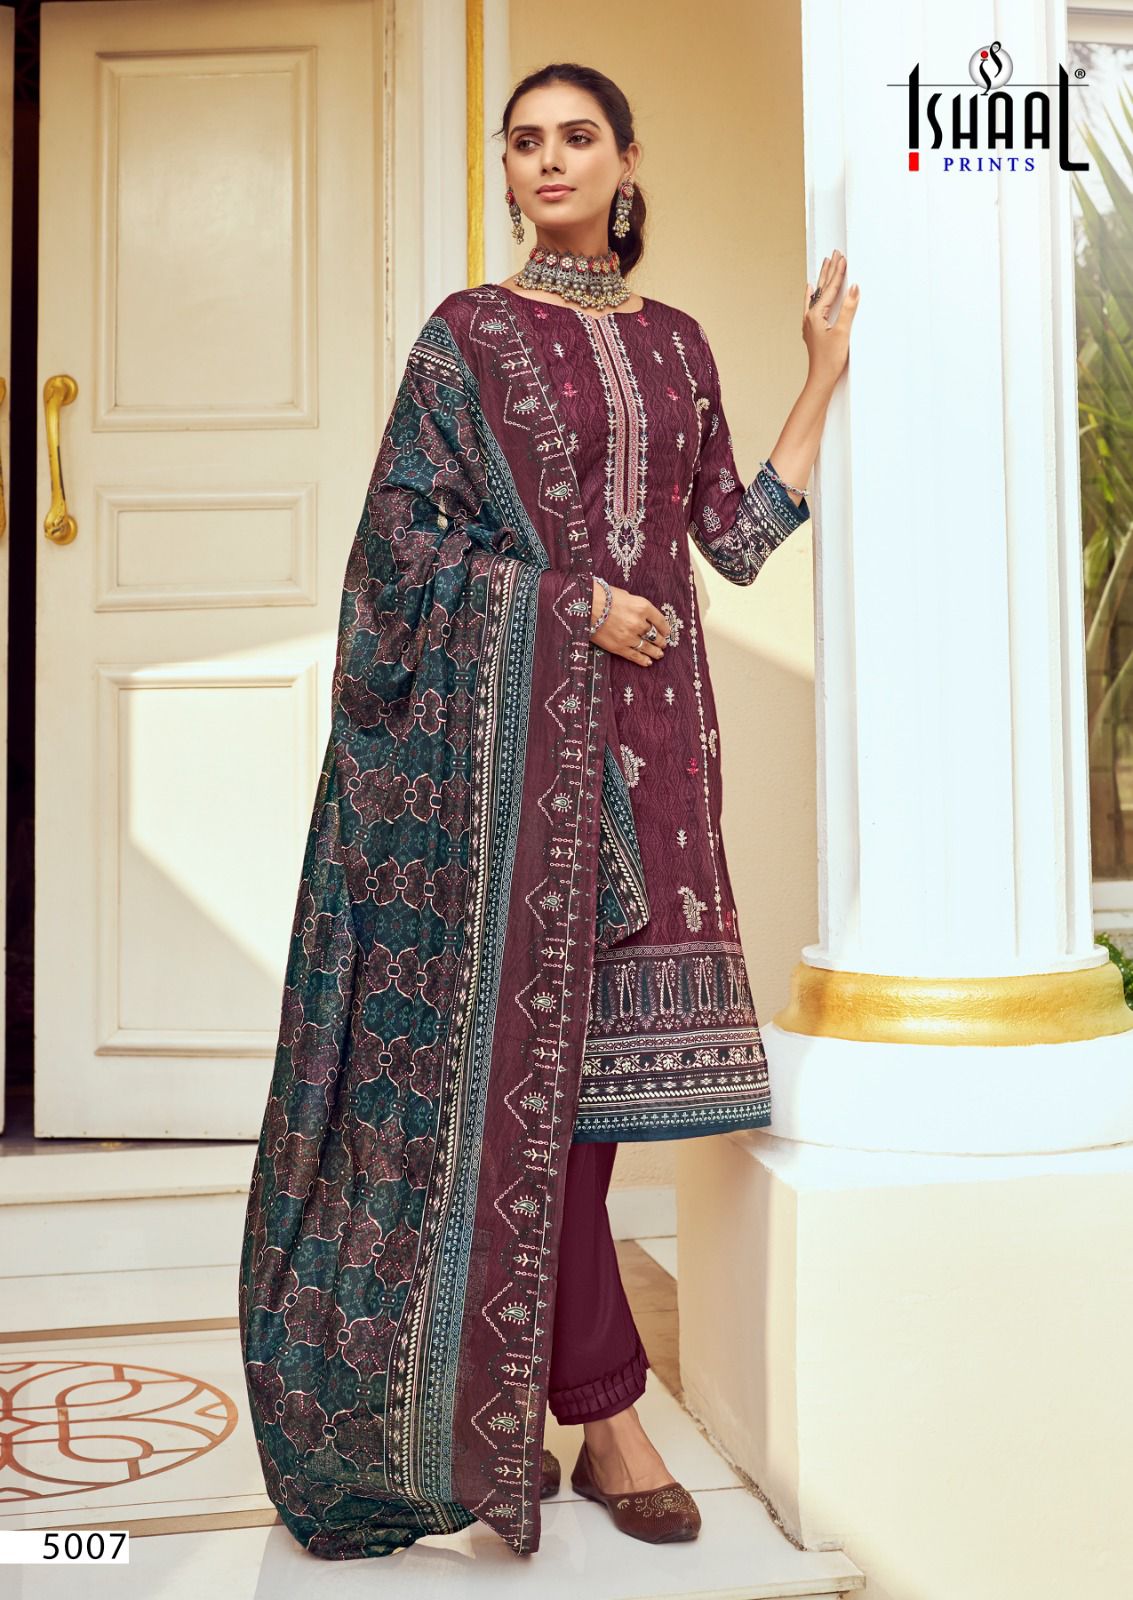 Ishaal Print Embroidered Vol  5 collection 9